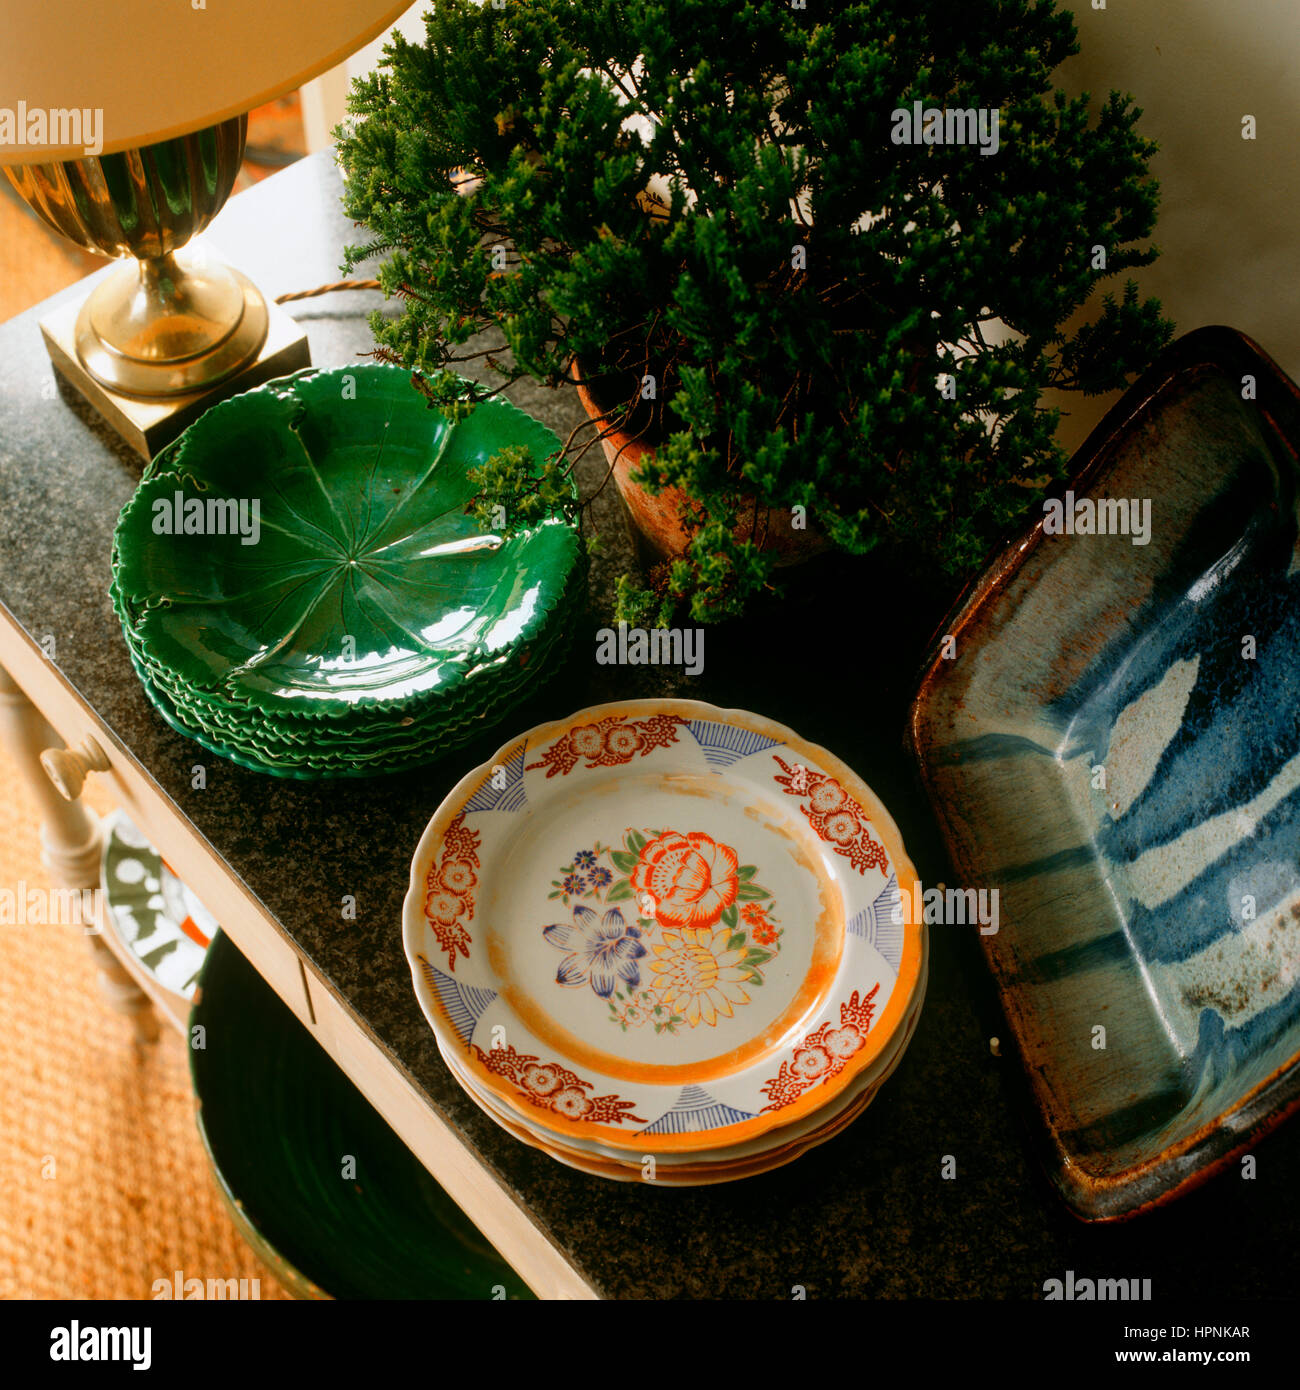 'A side table with plates, a pot plant and a table lamp.' Stock Photo